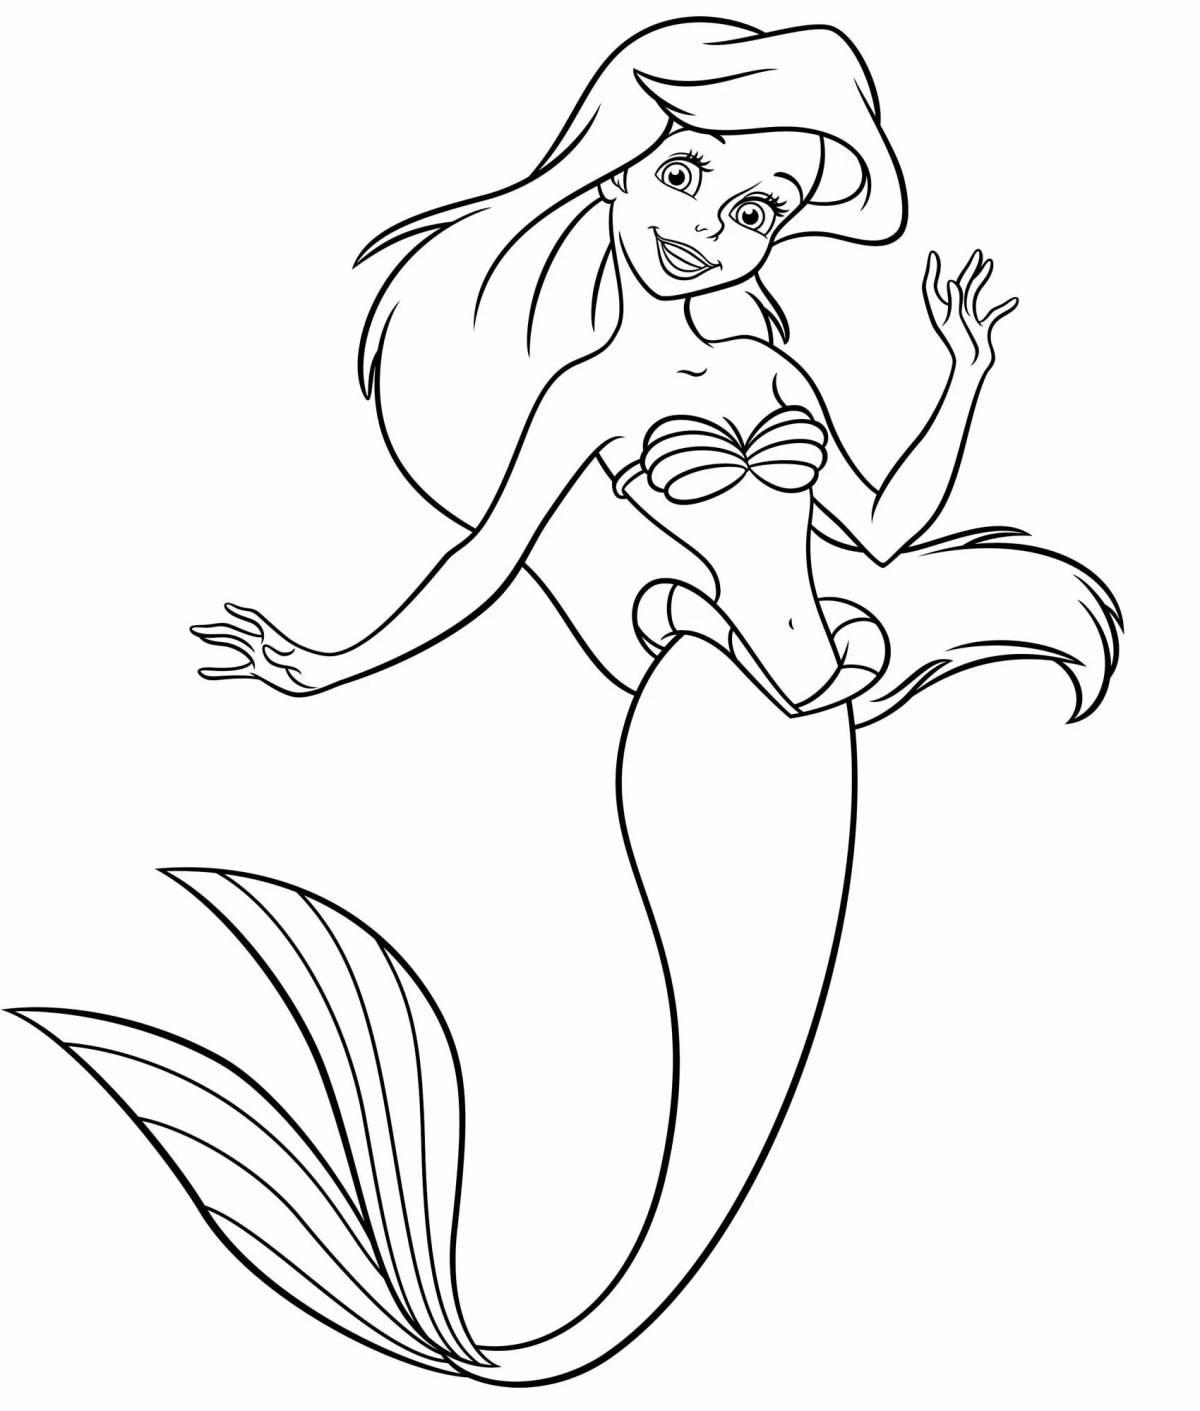 Coloring page gorgeous ariel with legs